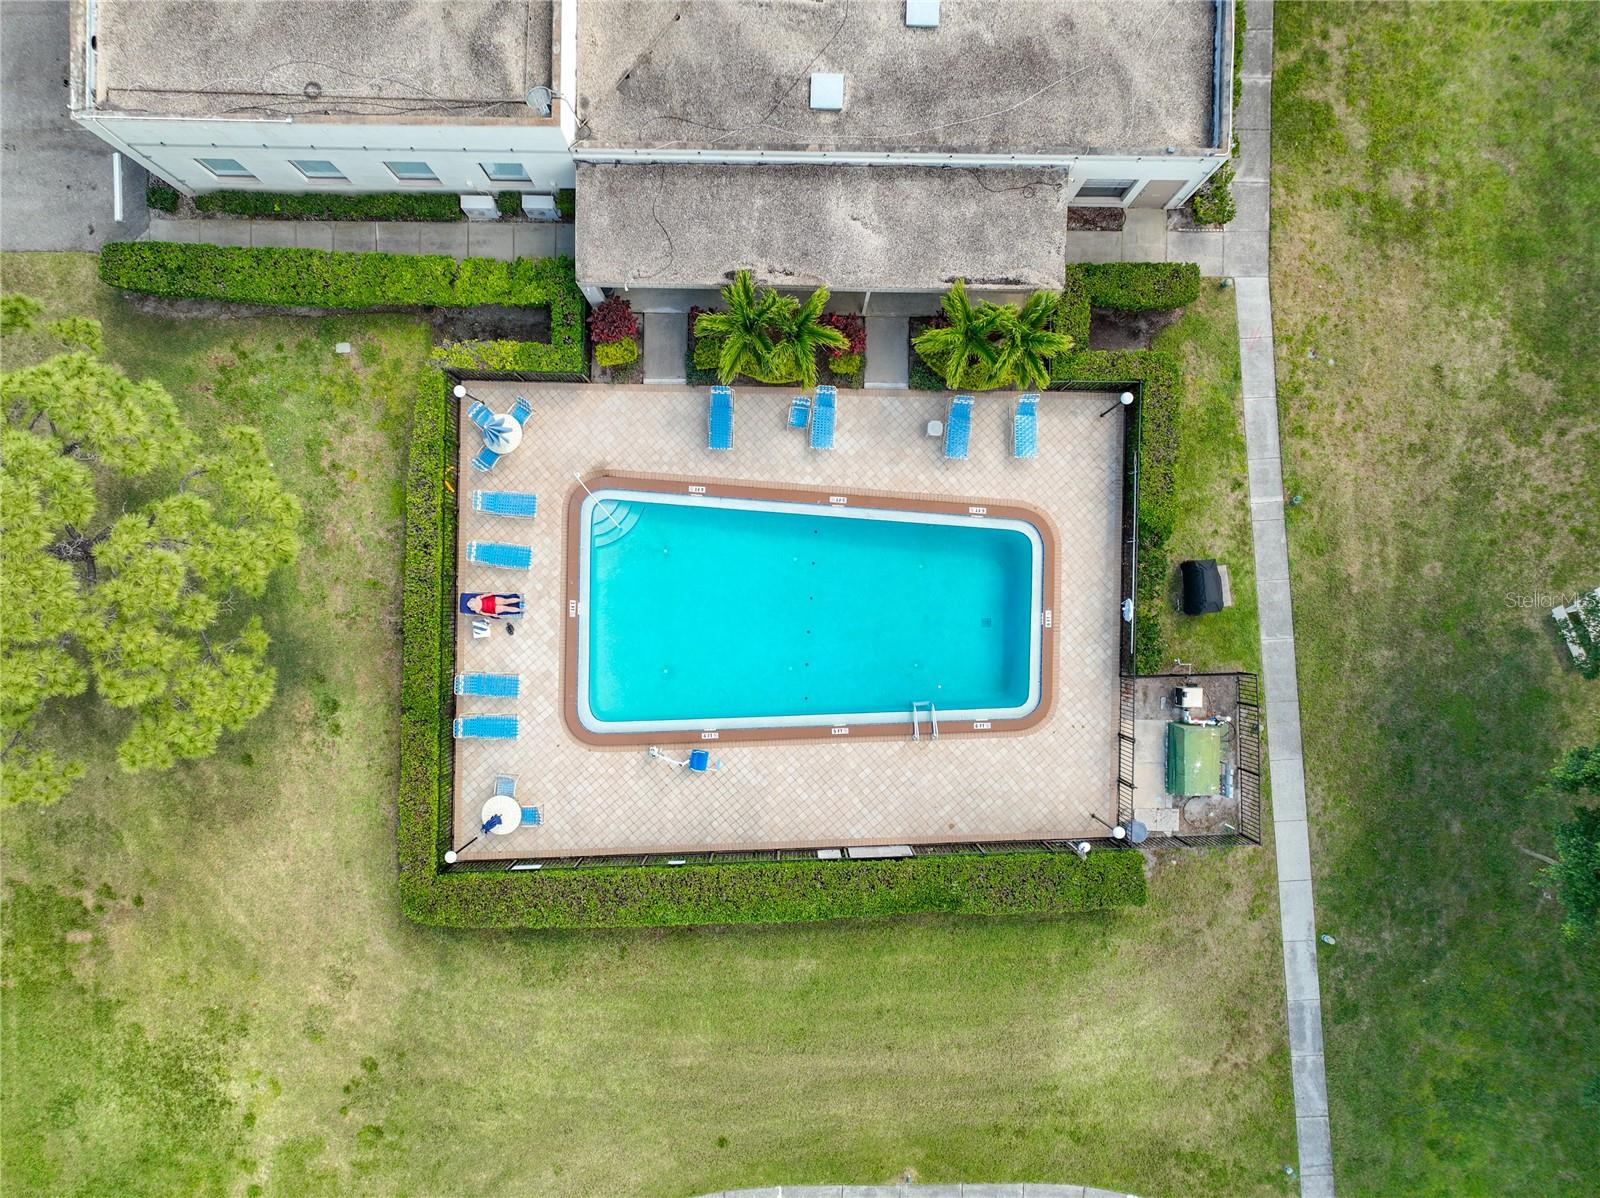 There are 6 pools on property - you can use anyone you want.